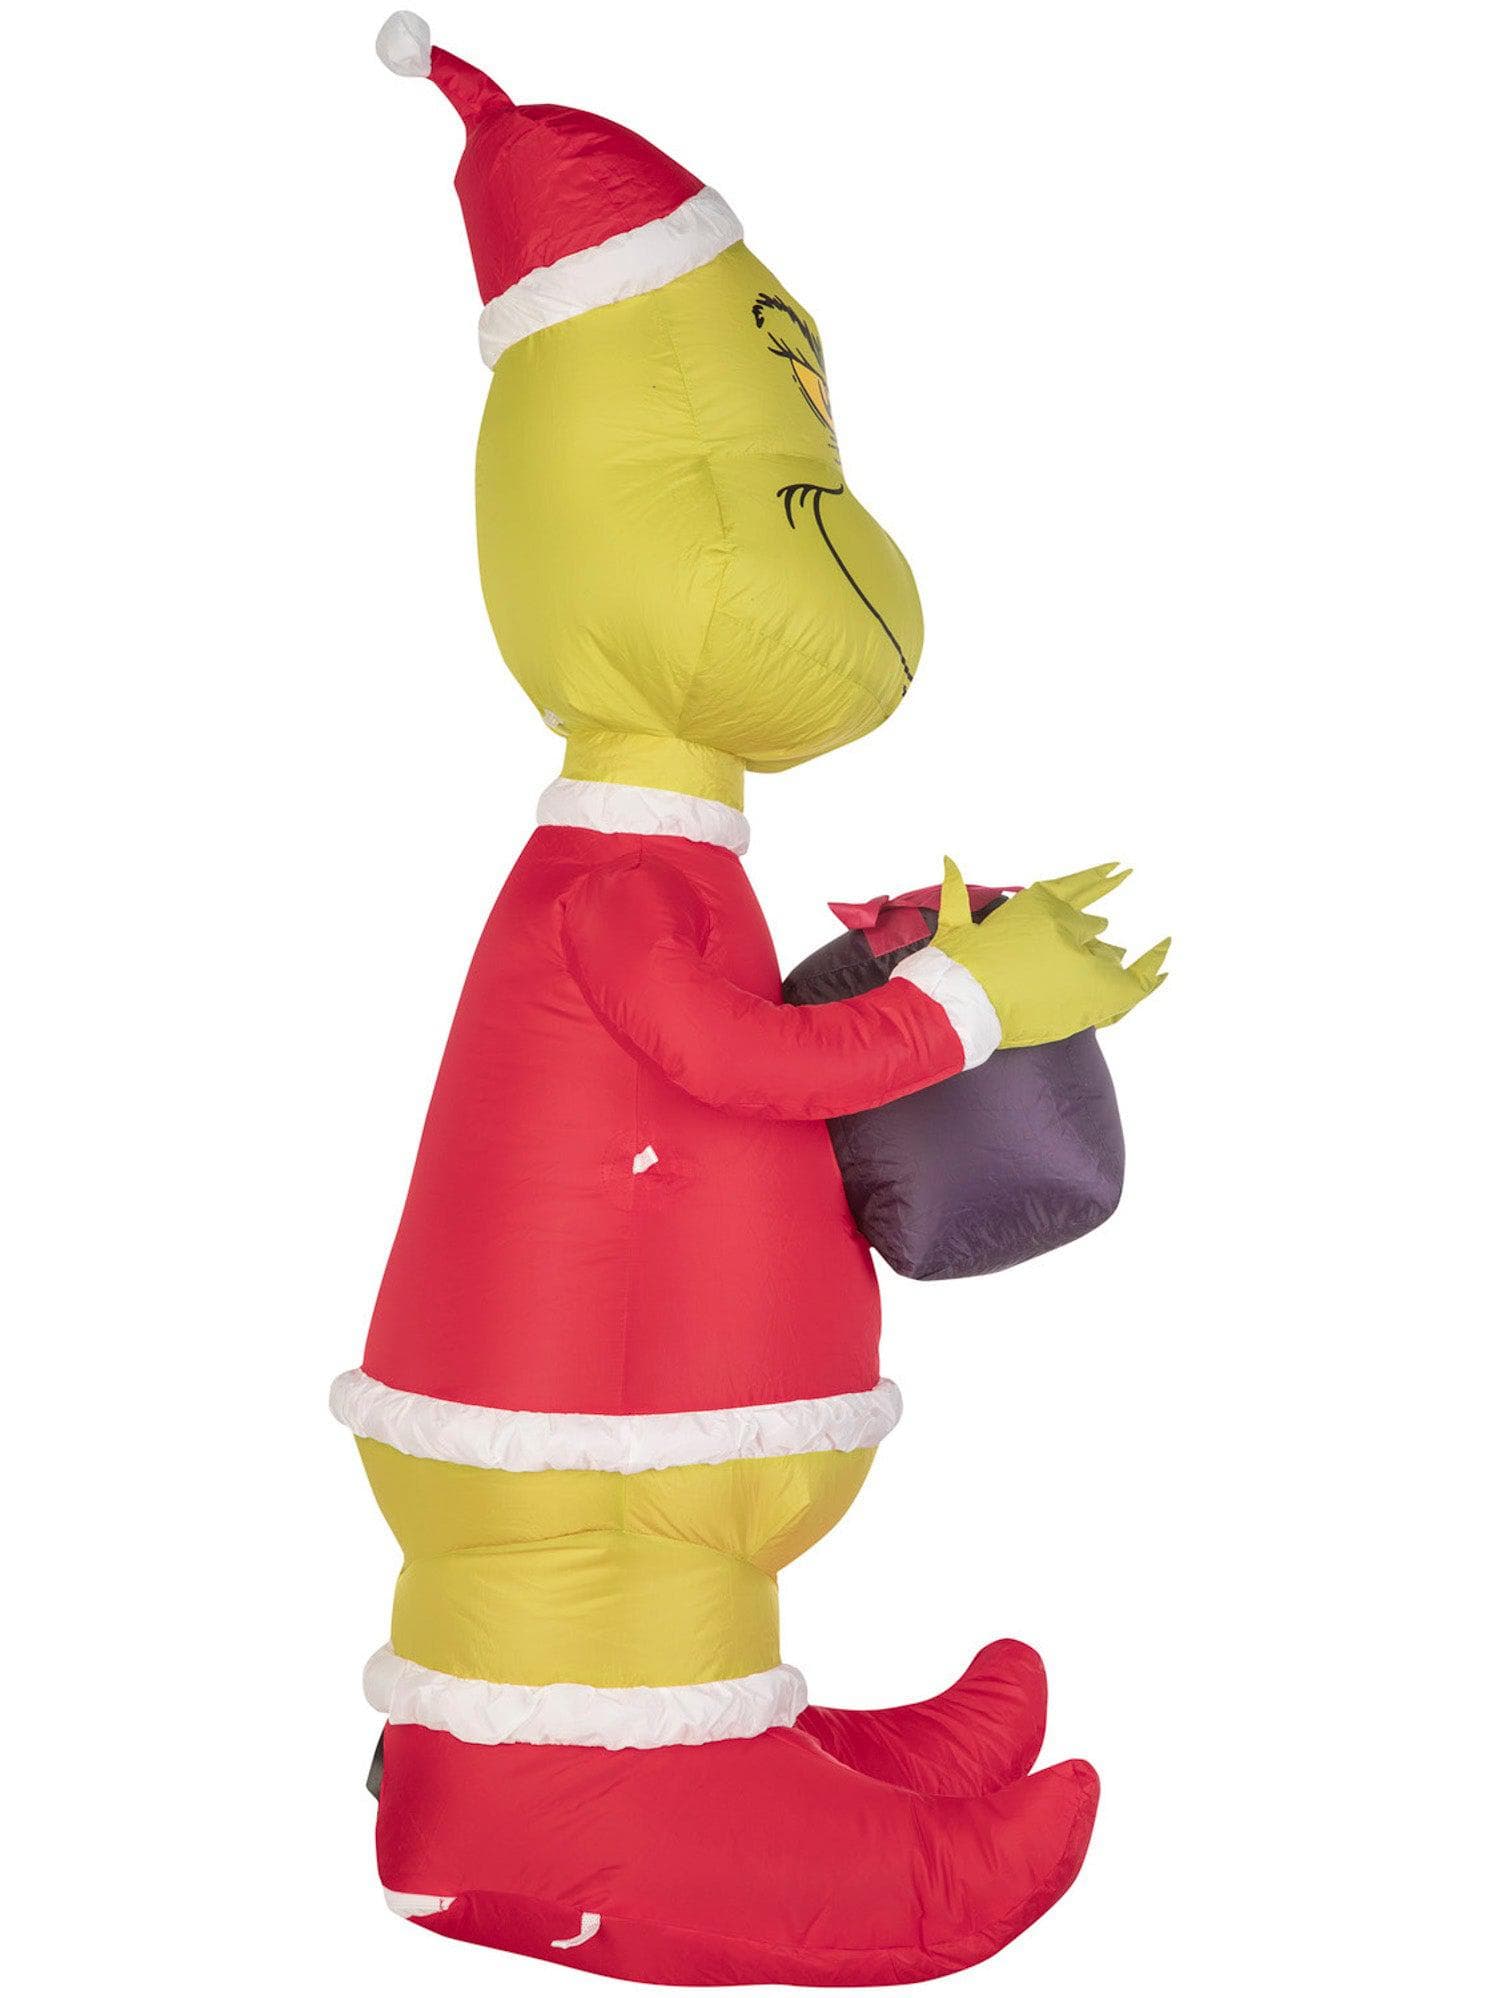 4 Foot Dr. Seuss The Grinch Holiday Light Up Christmas Inflatable Lawn Decor - costumes.com